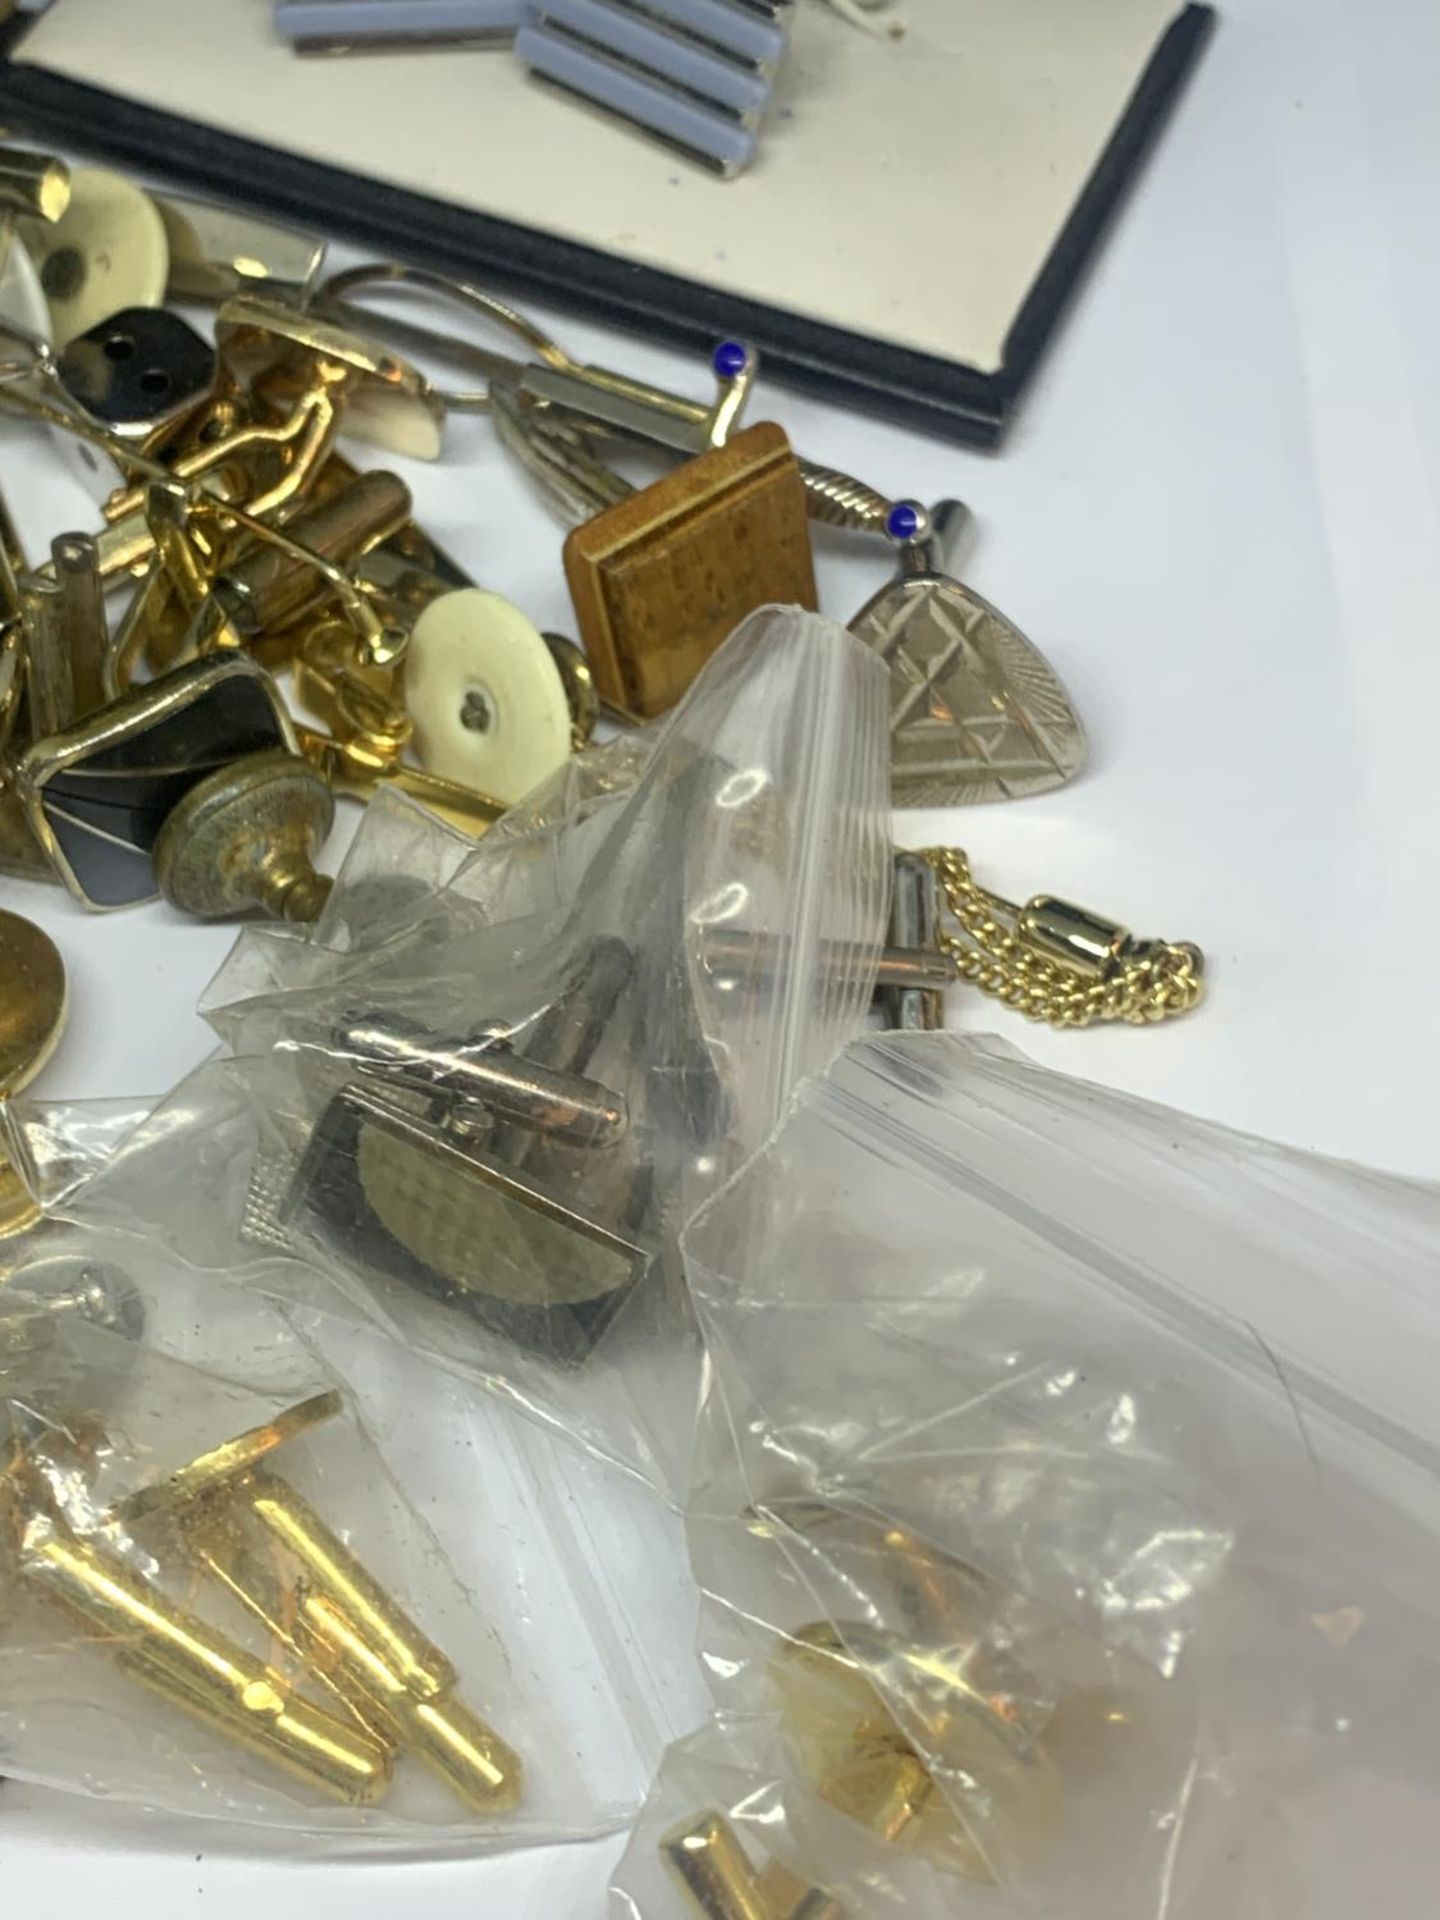 A LARGE QUANTIY OF CUFFLINKS AND TIE PINS - Image 5 of 7